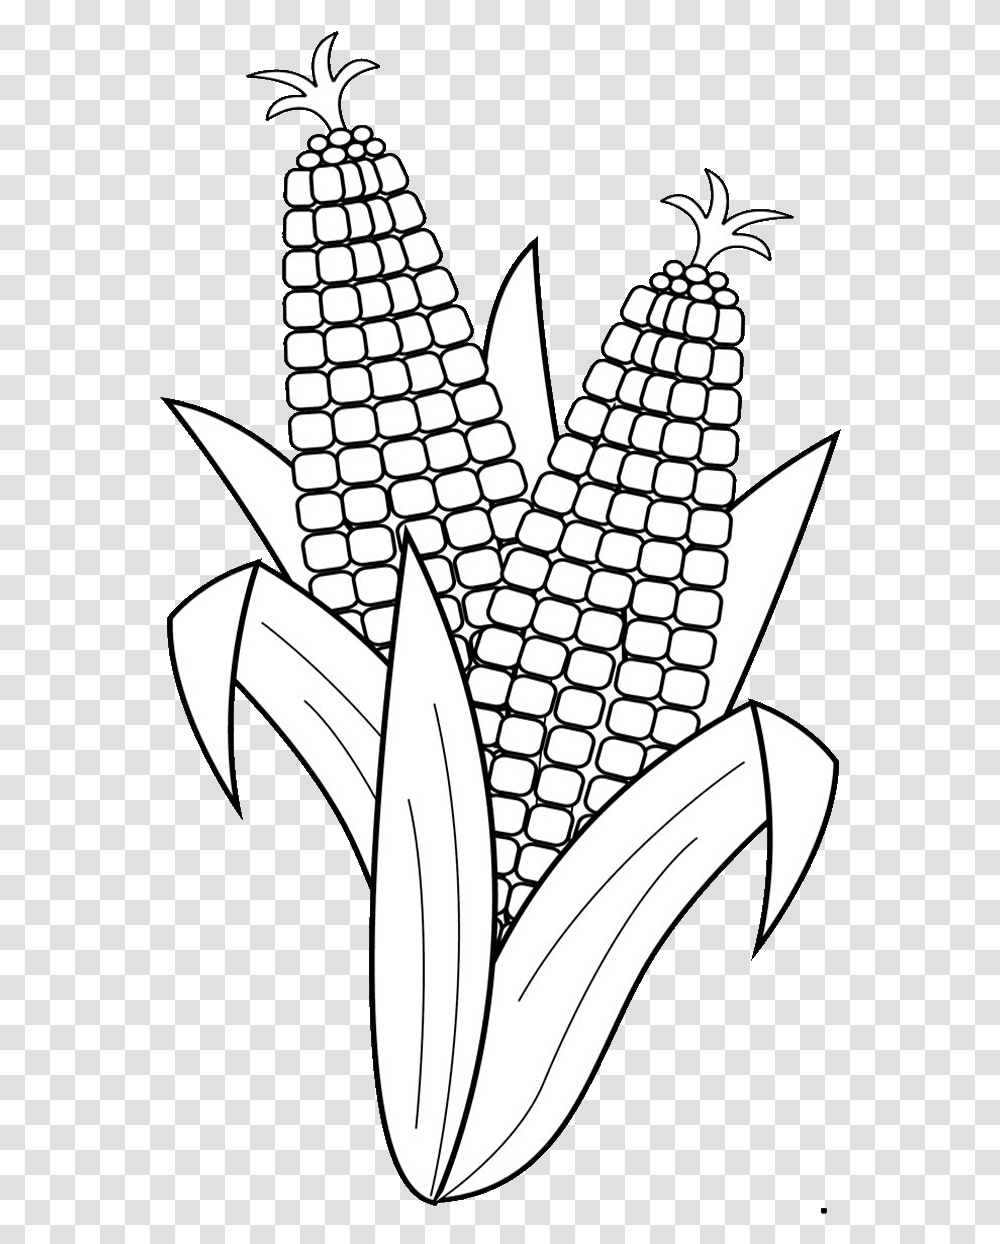 Surprising Corn Clipart For Free Fruits And Vegetables Clipart Black And White, Plant, Food, Zebra, Wildlife Transparent Png